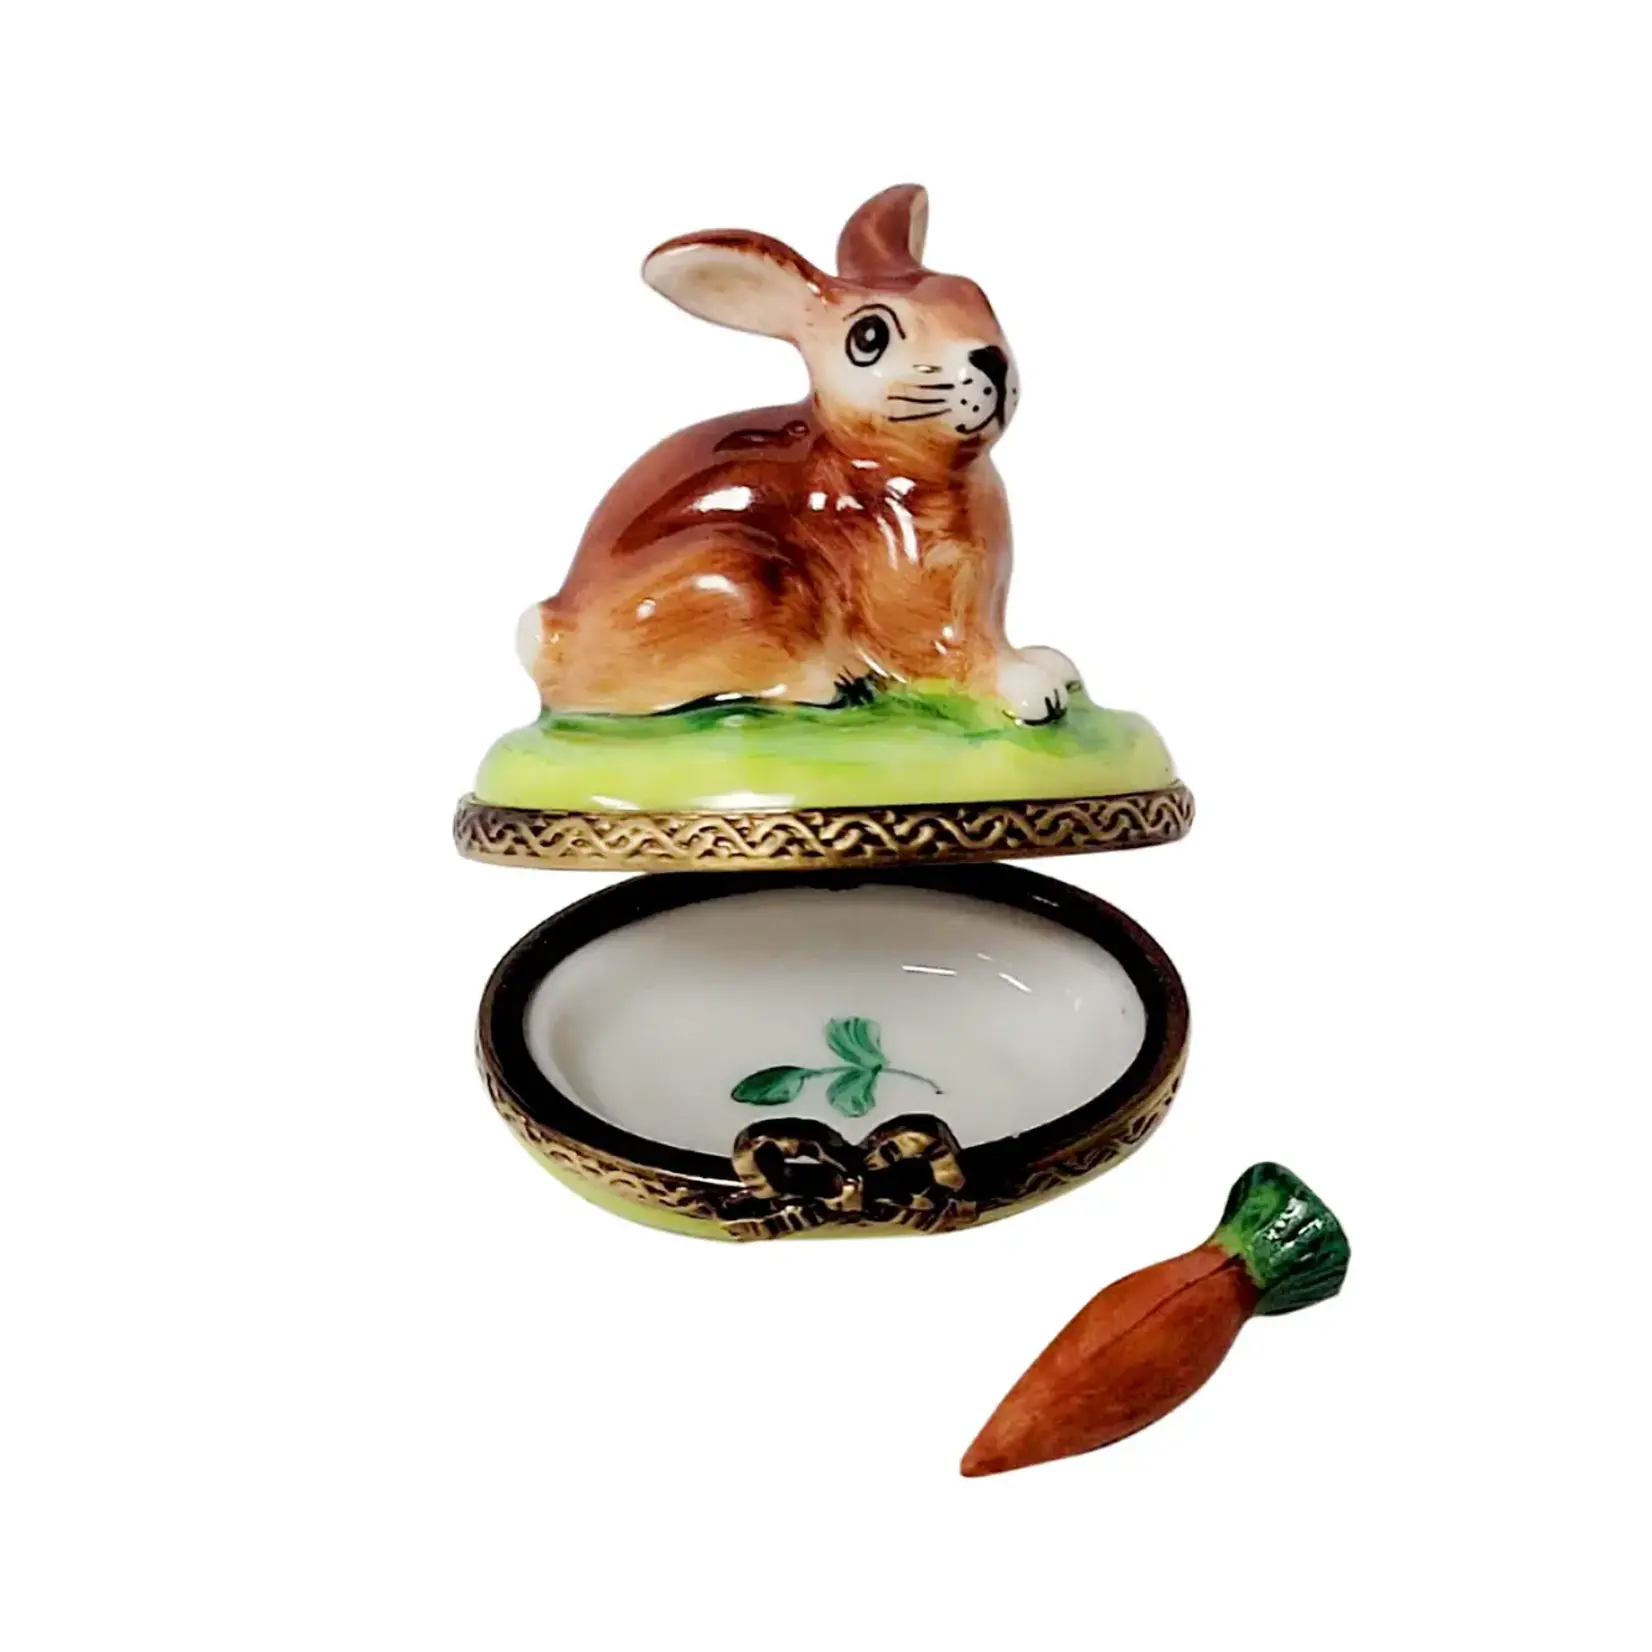 Rochard Limoges Small Bunny With Removable Carrot